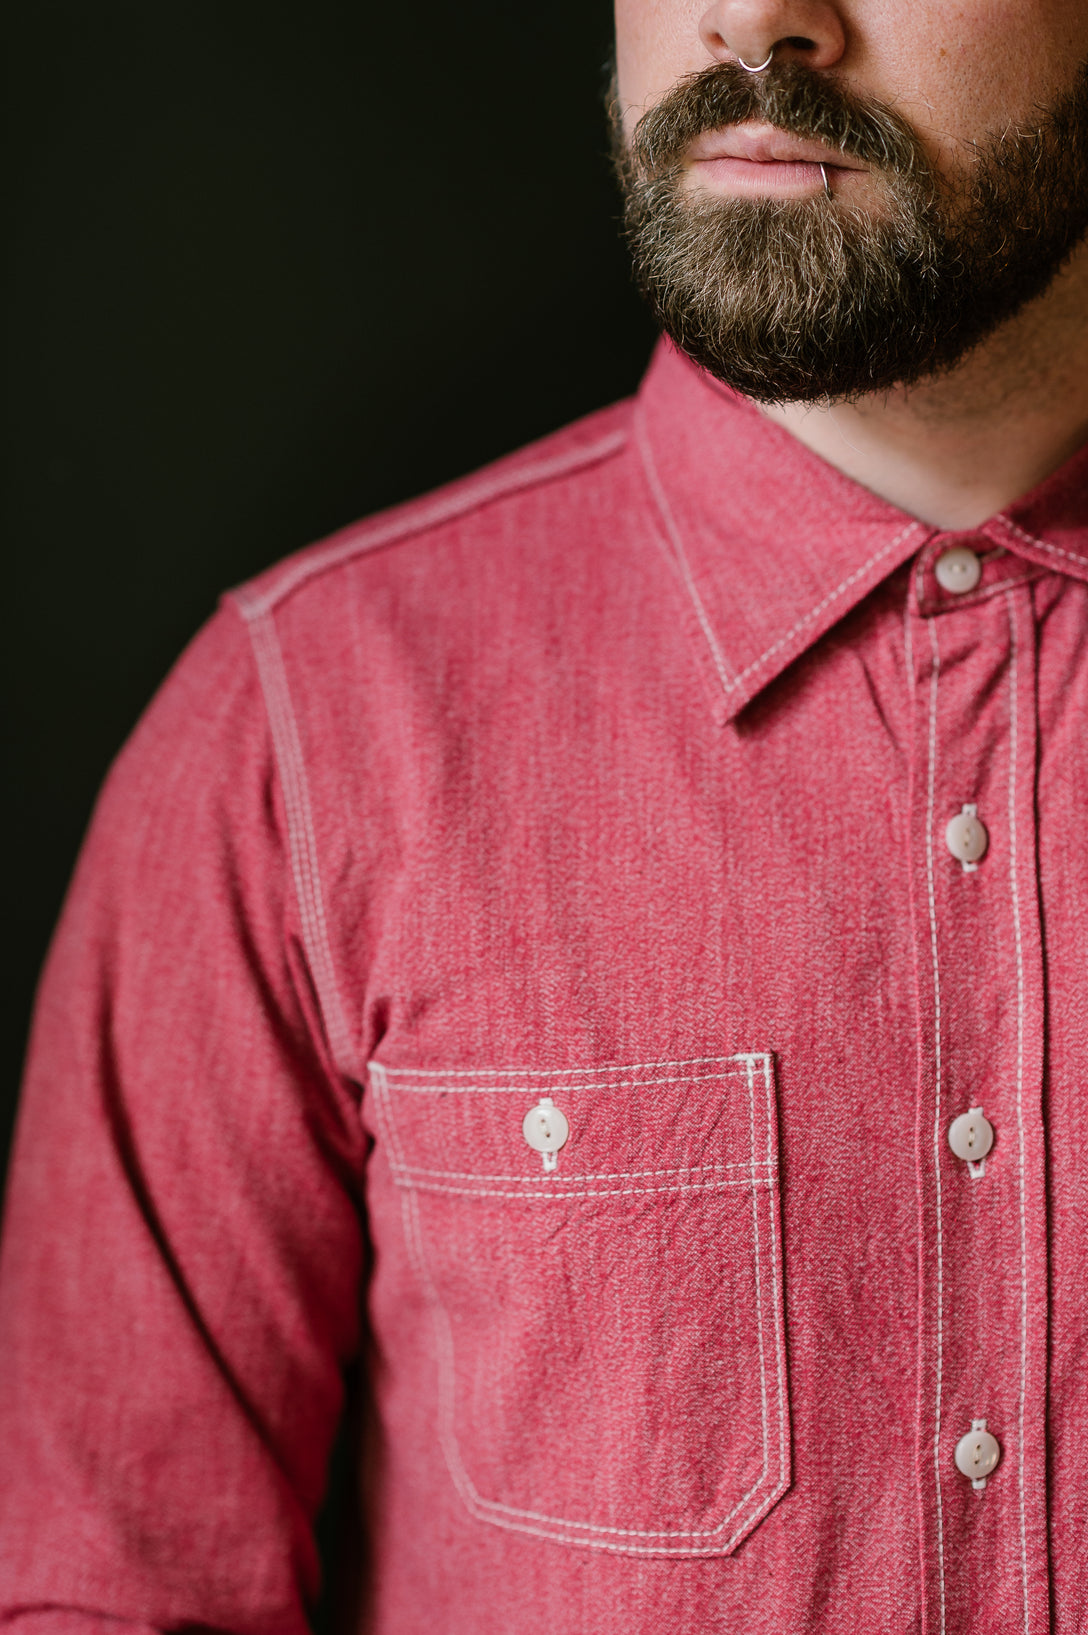 IHSH-290-RED - 10oz Mock Twist Selvedge Chambray Work Shirt - Red